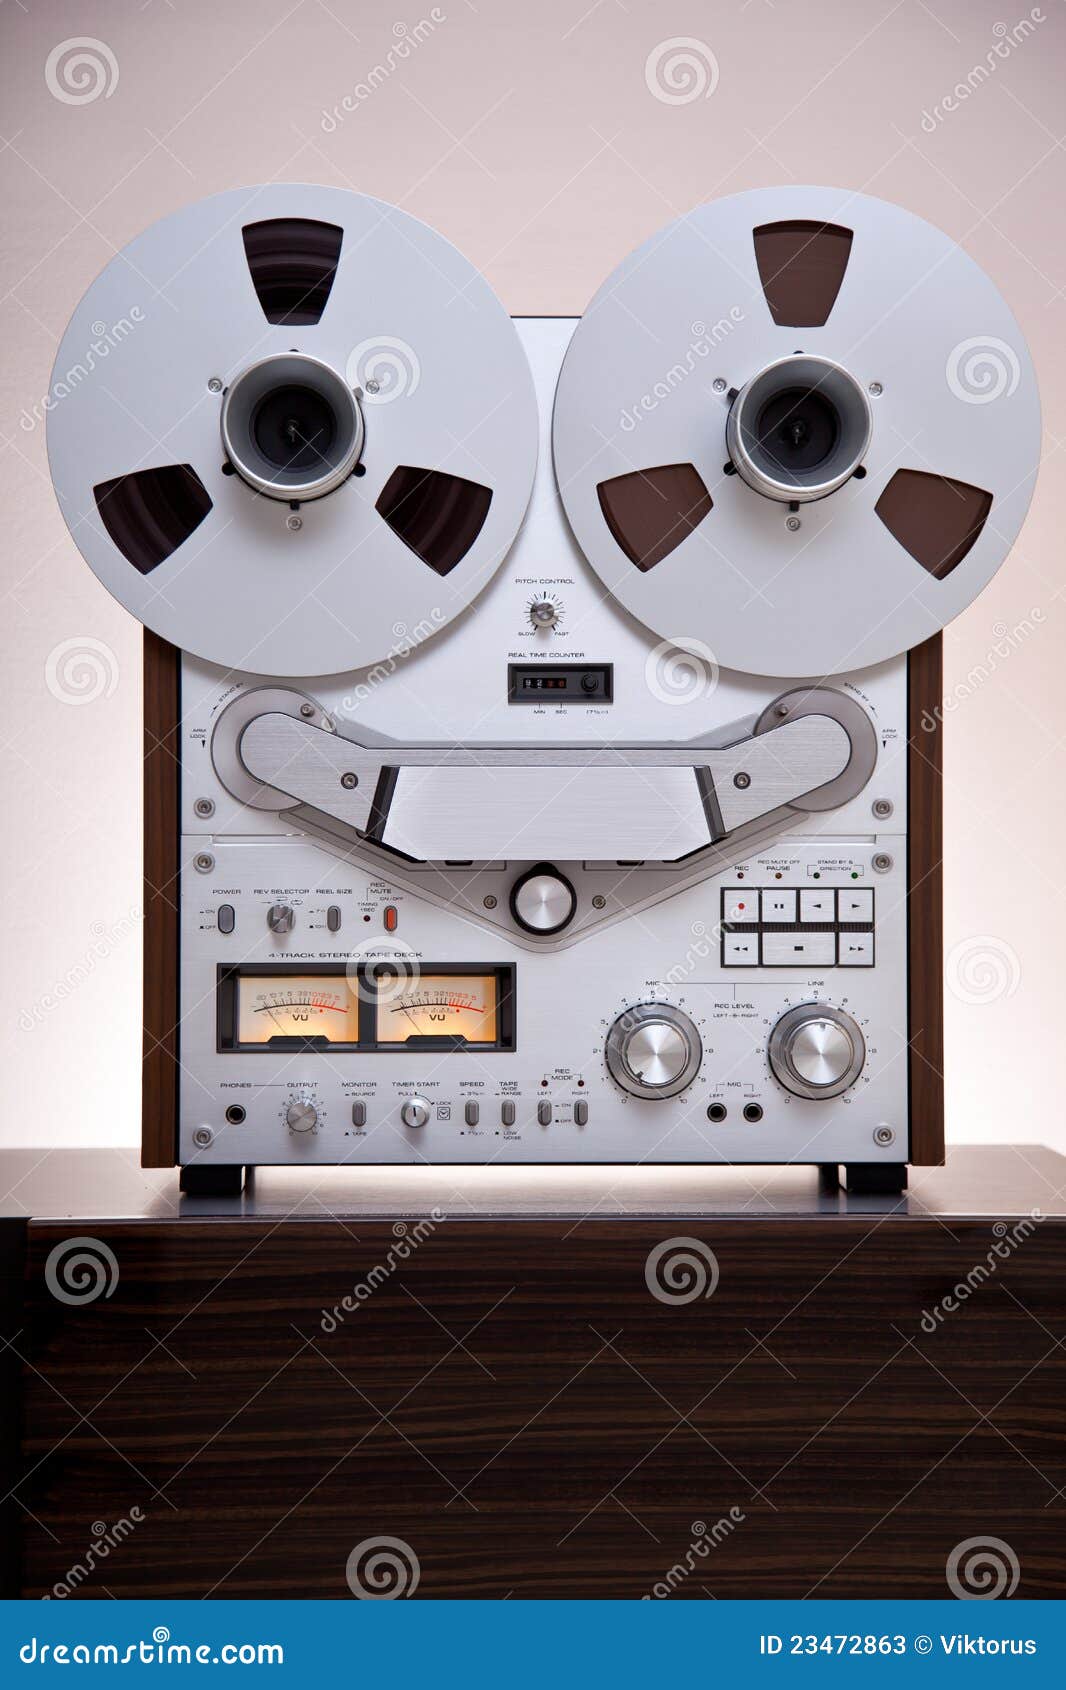 Analog Stereo Open Reel Tape Deck Recorder Stock Image - Image of